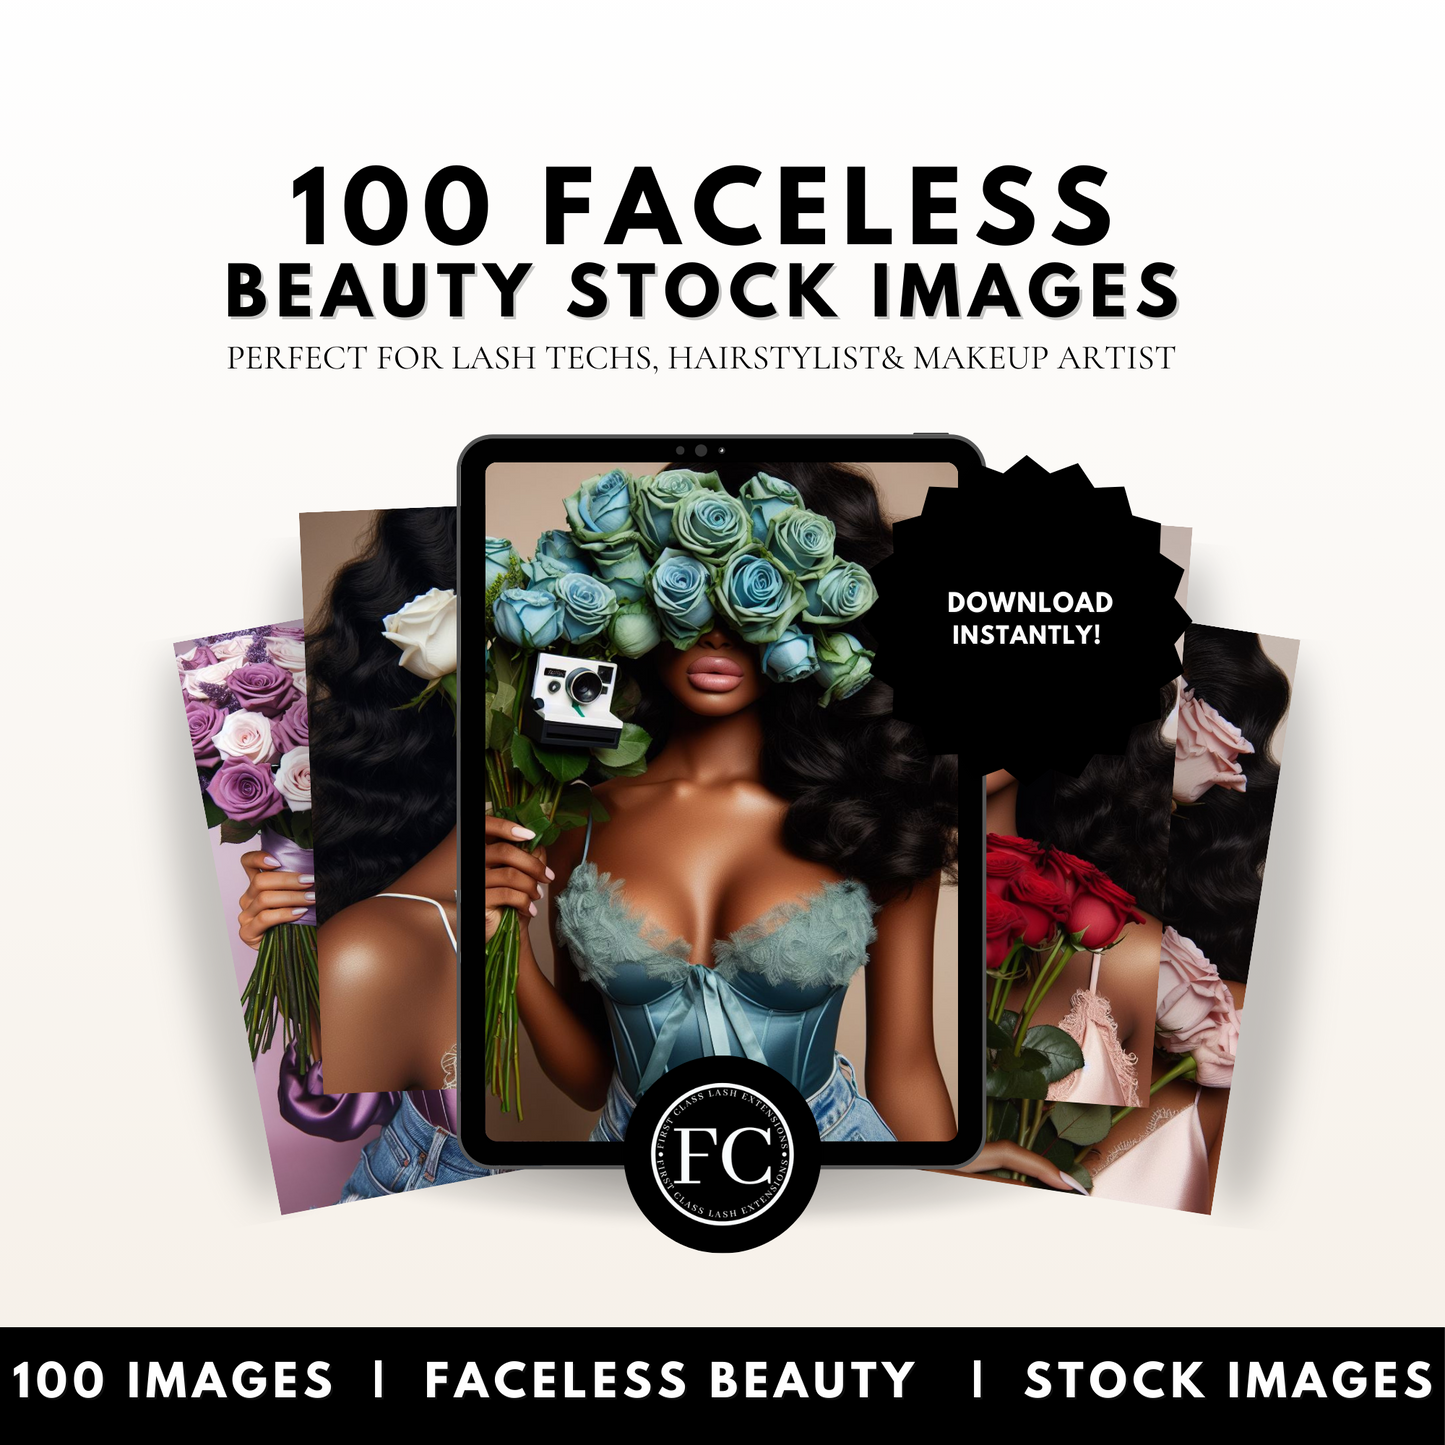 Faceless Beauty Stock Images